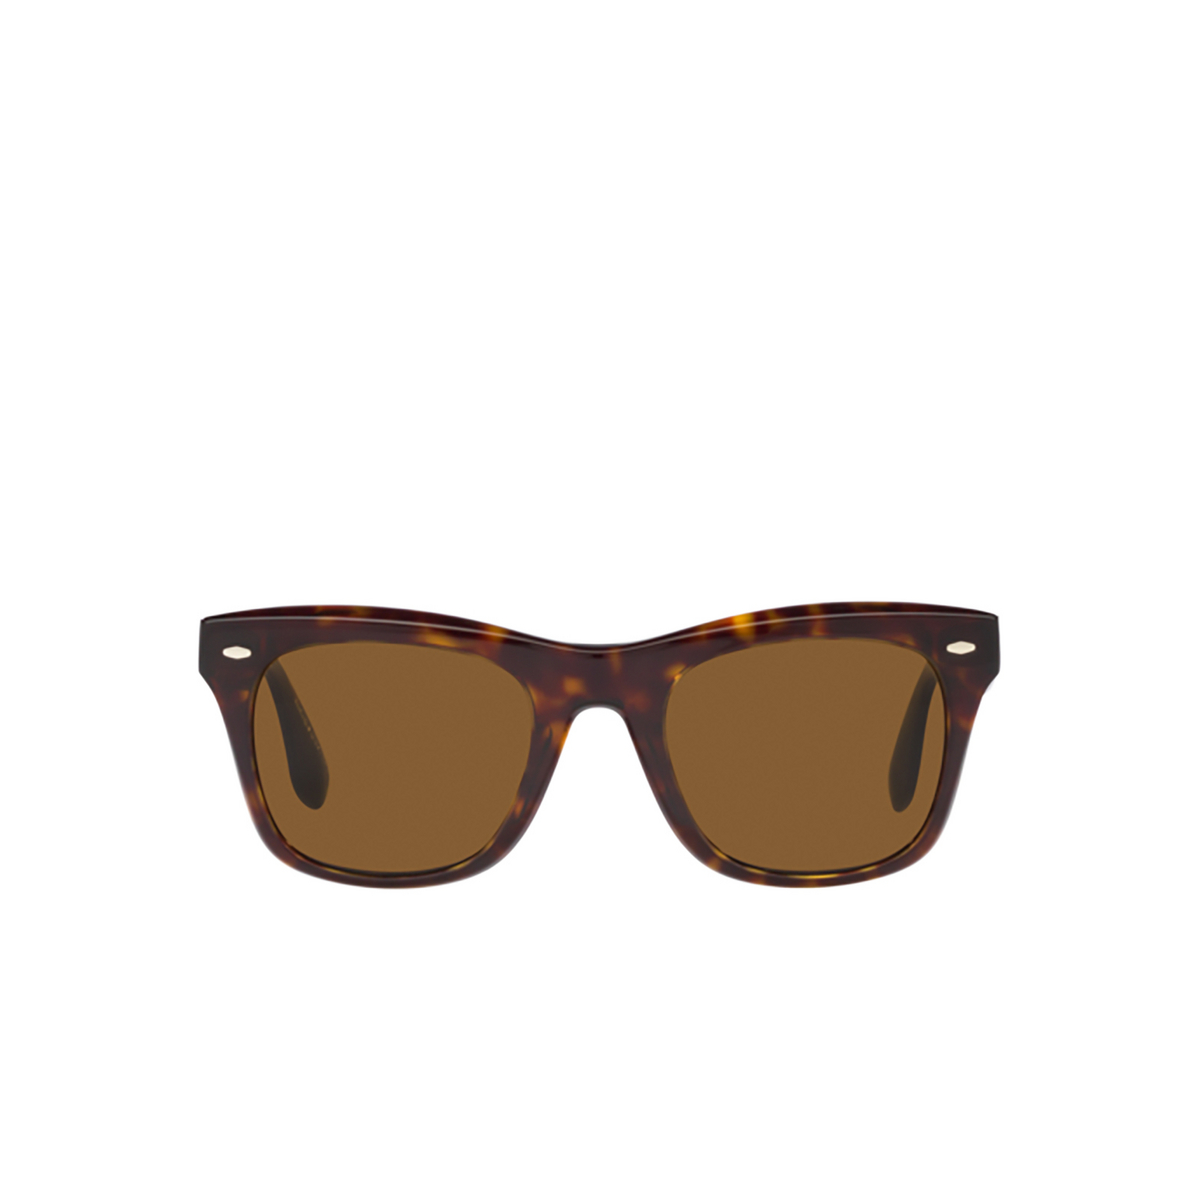 Oliver Peoples MR. BRUNELLO Sunglasses 100953 362 - front view